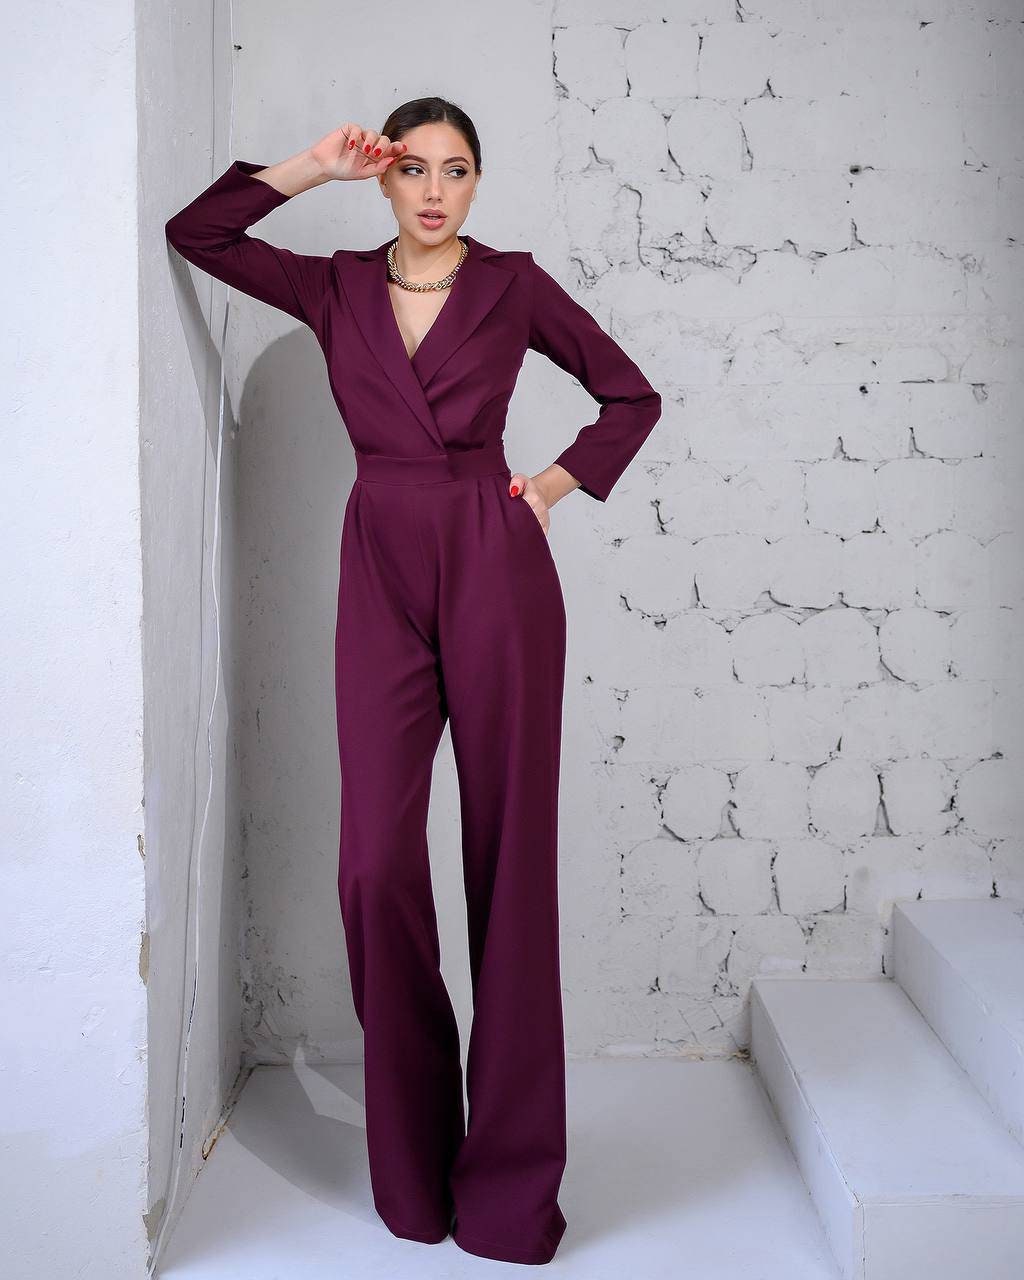 fcity.in - Jumpsuits For Womenjumpsuitjumpsuits For Jumpsuit For